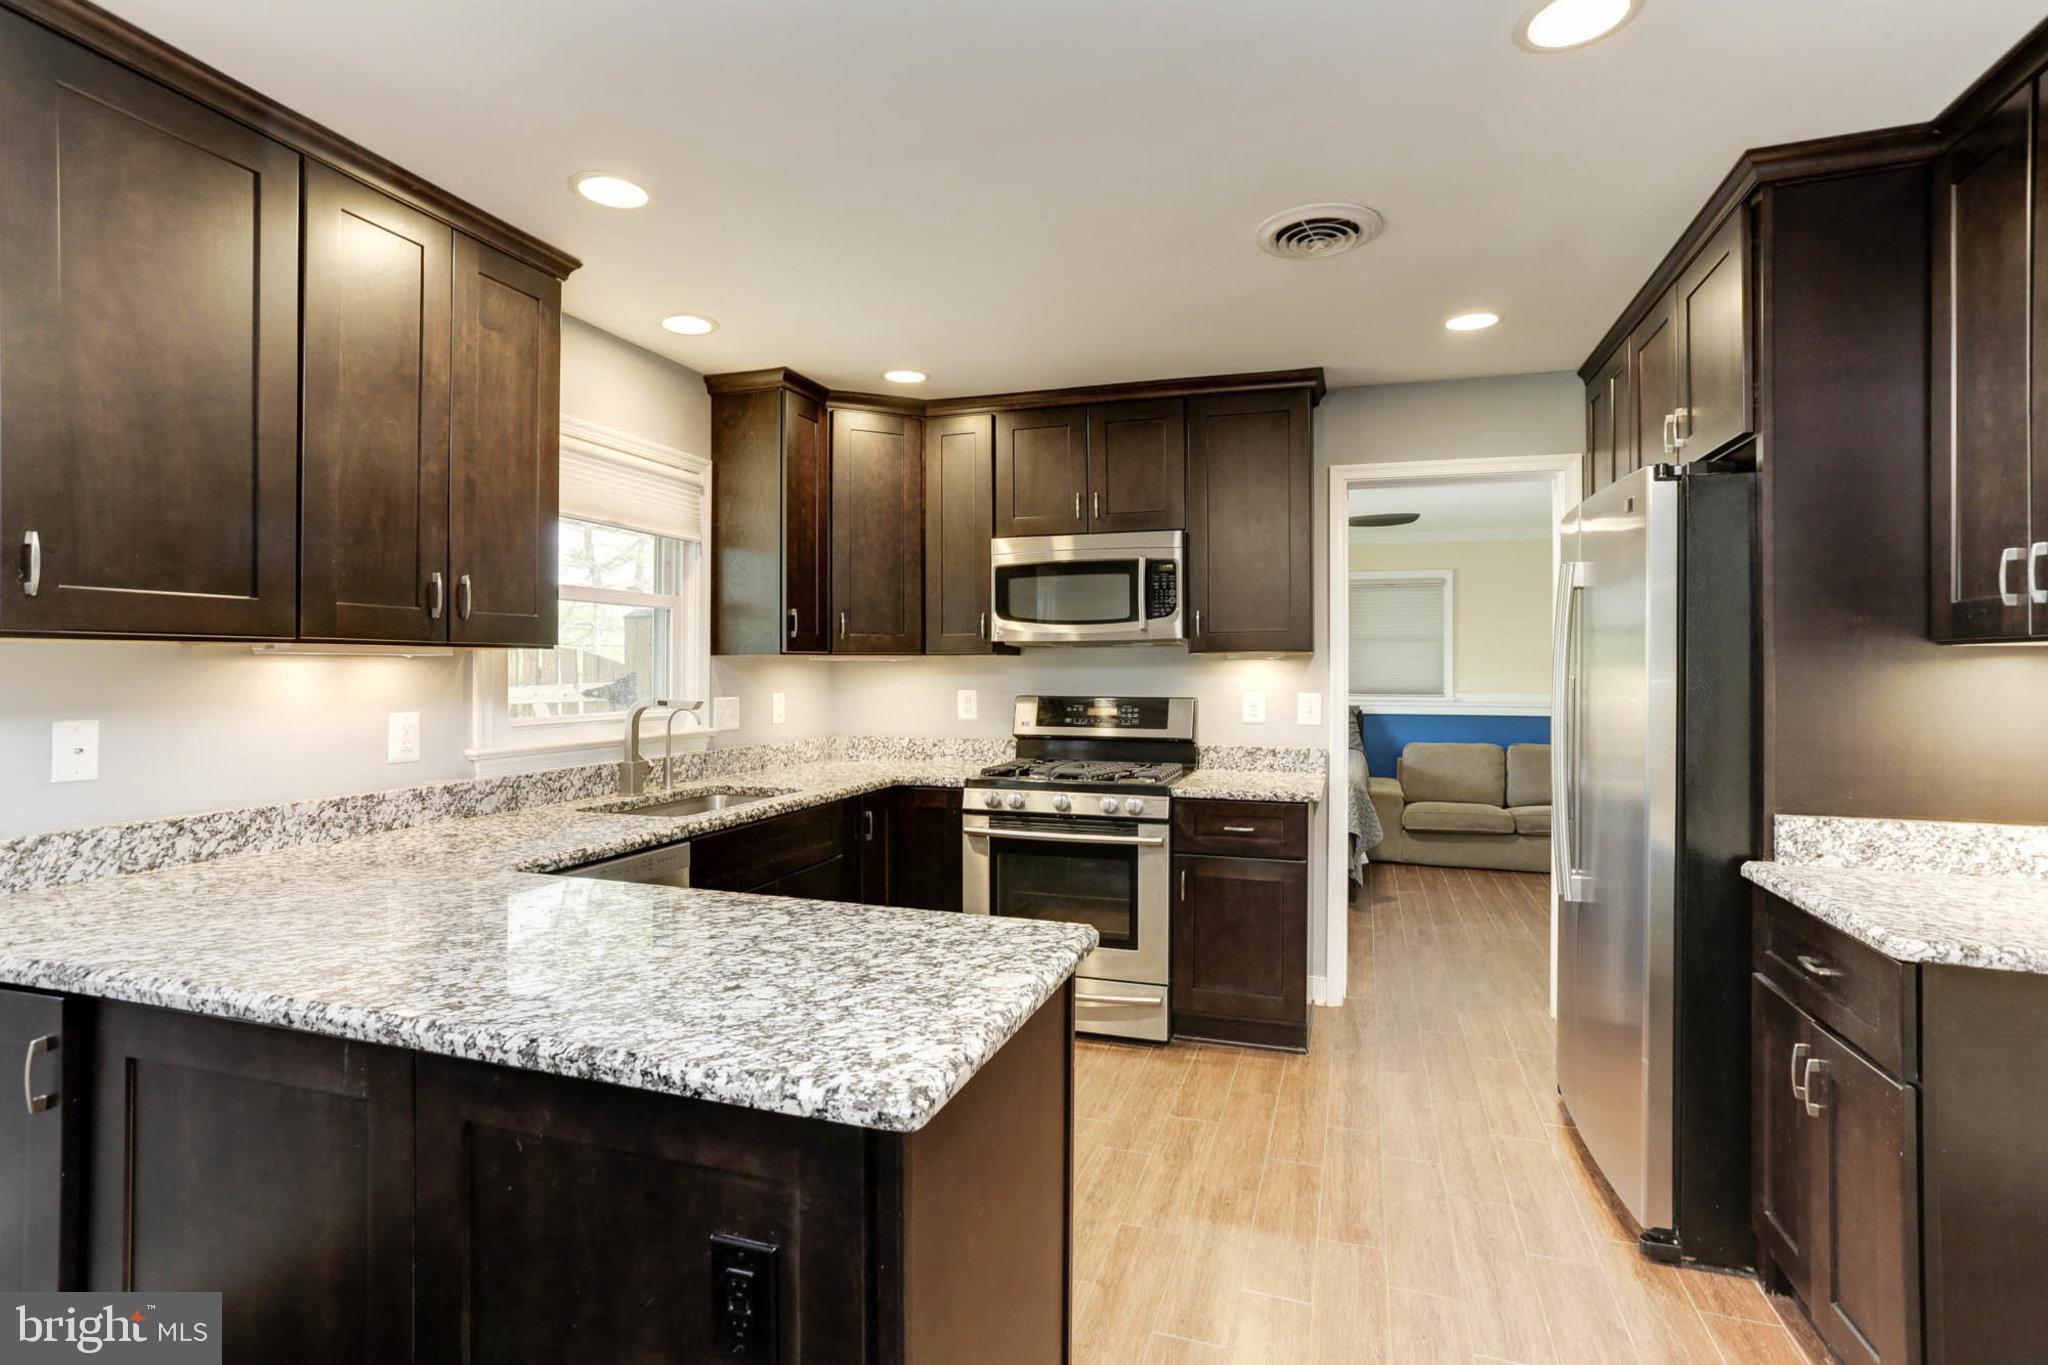 a kitchen with kitchen island granite countertop stainless steel appliances a sink stove refrigerator and cabinets